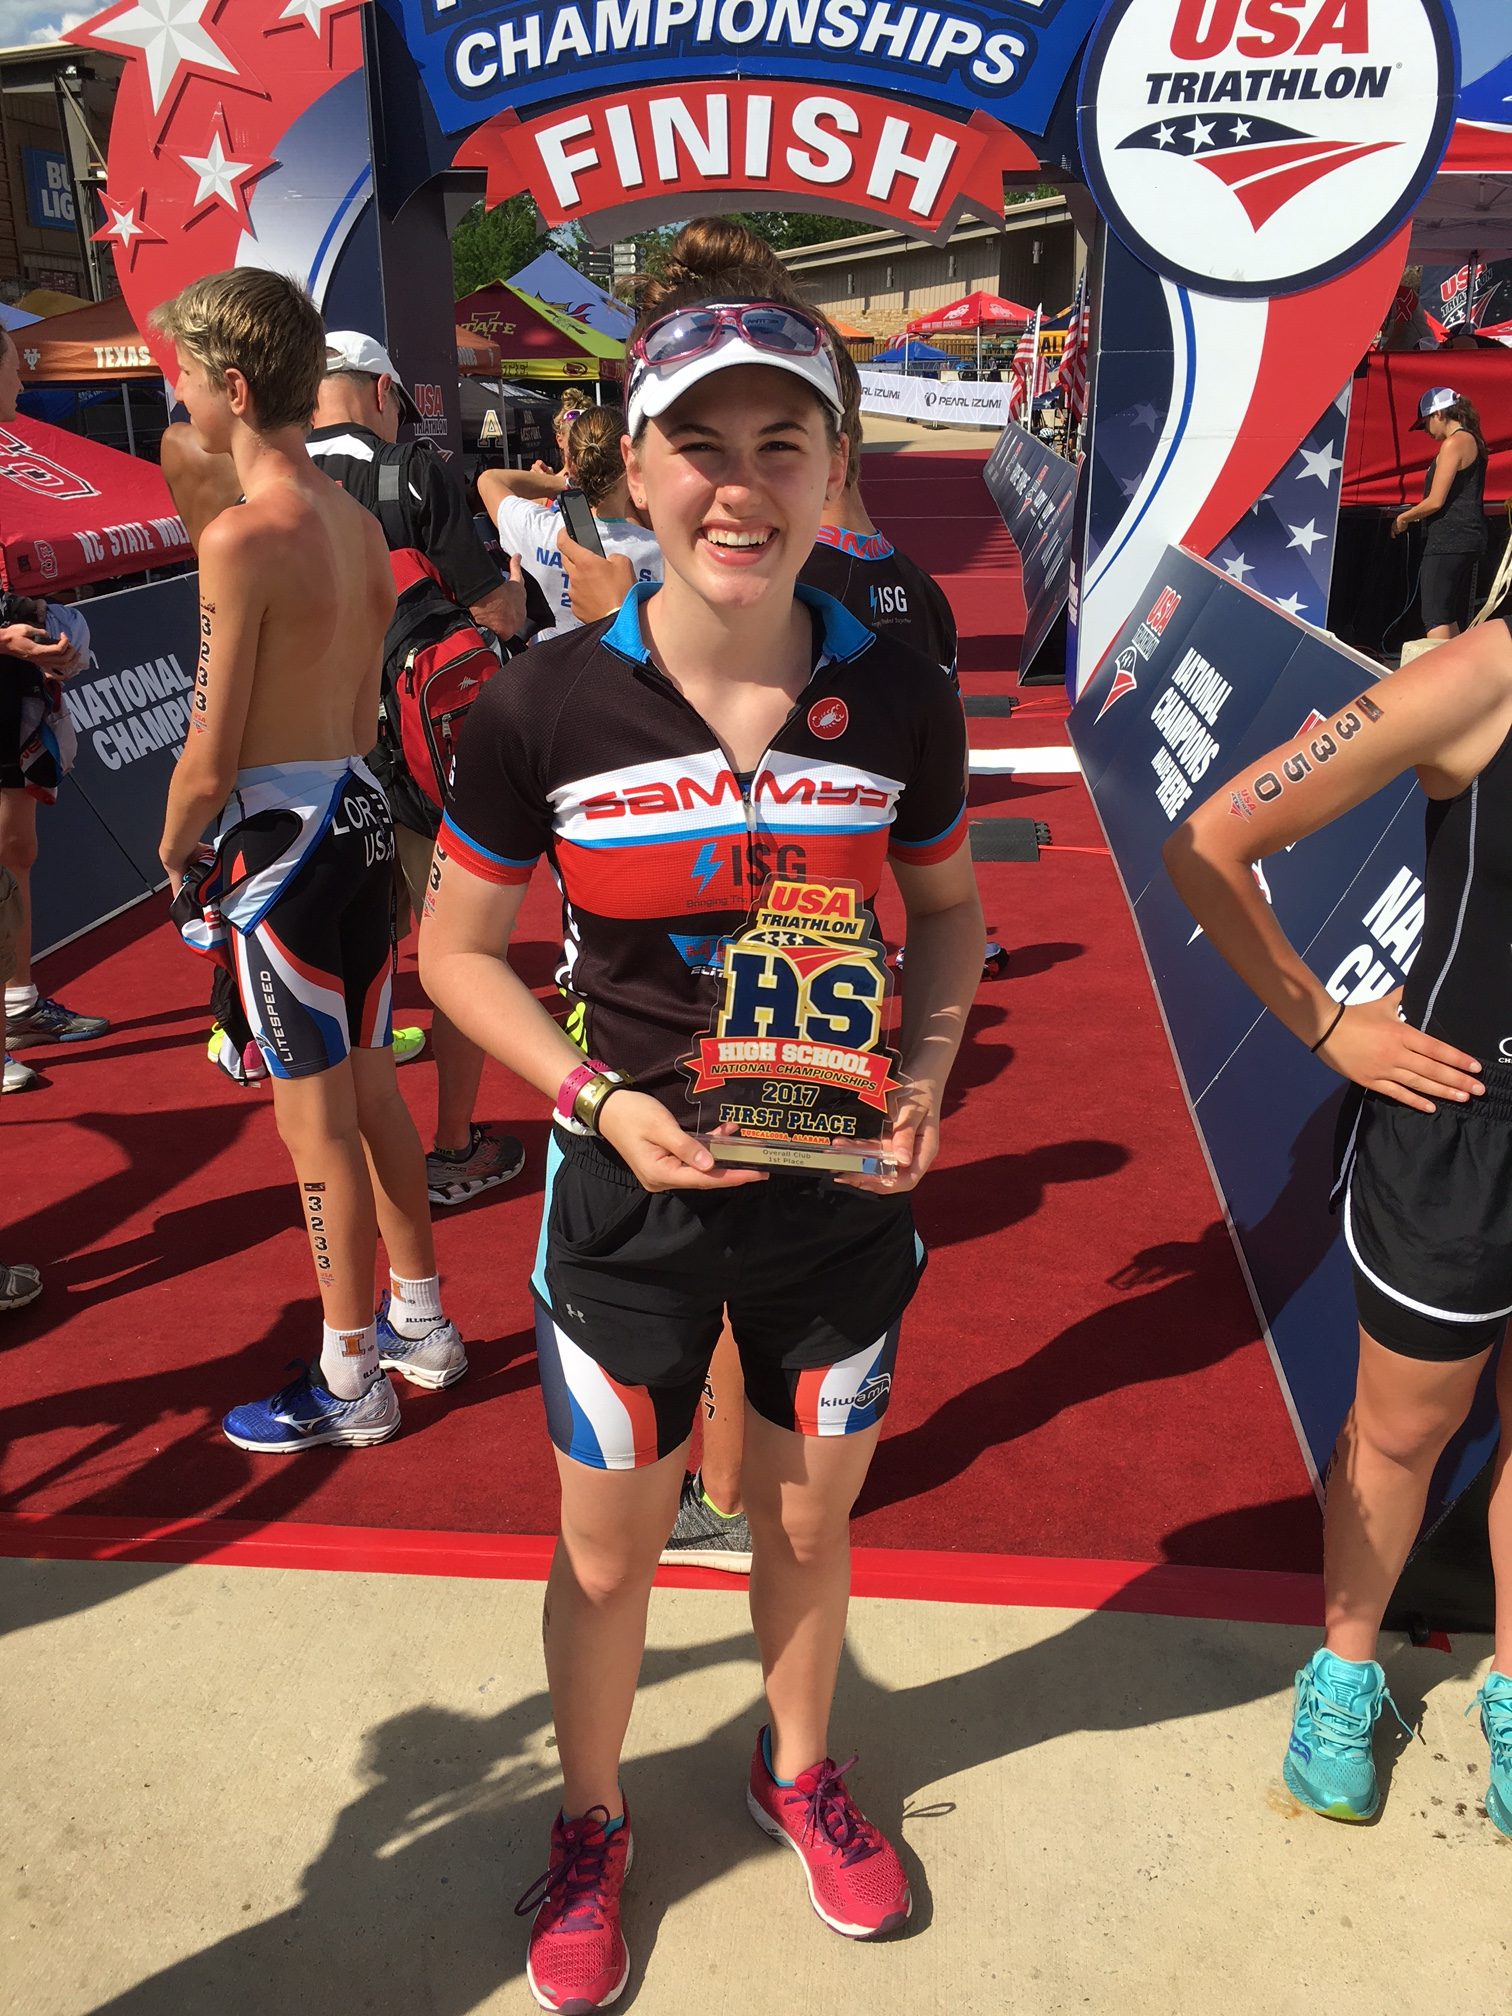 FEATURE: LaSalle makes name for herself through triathlons